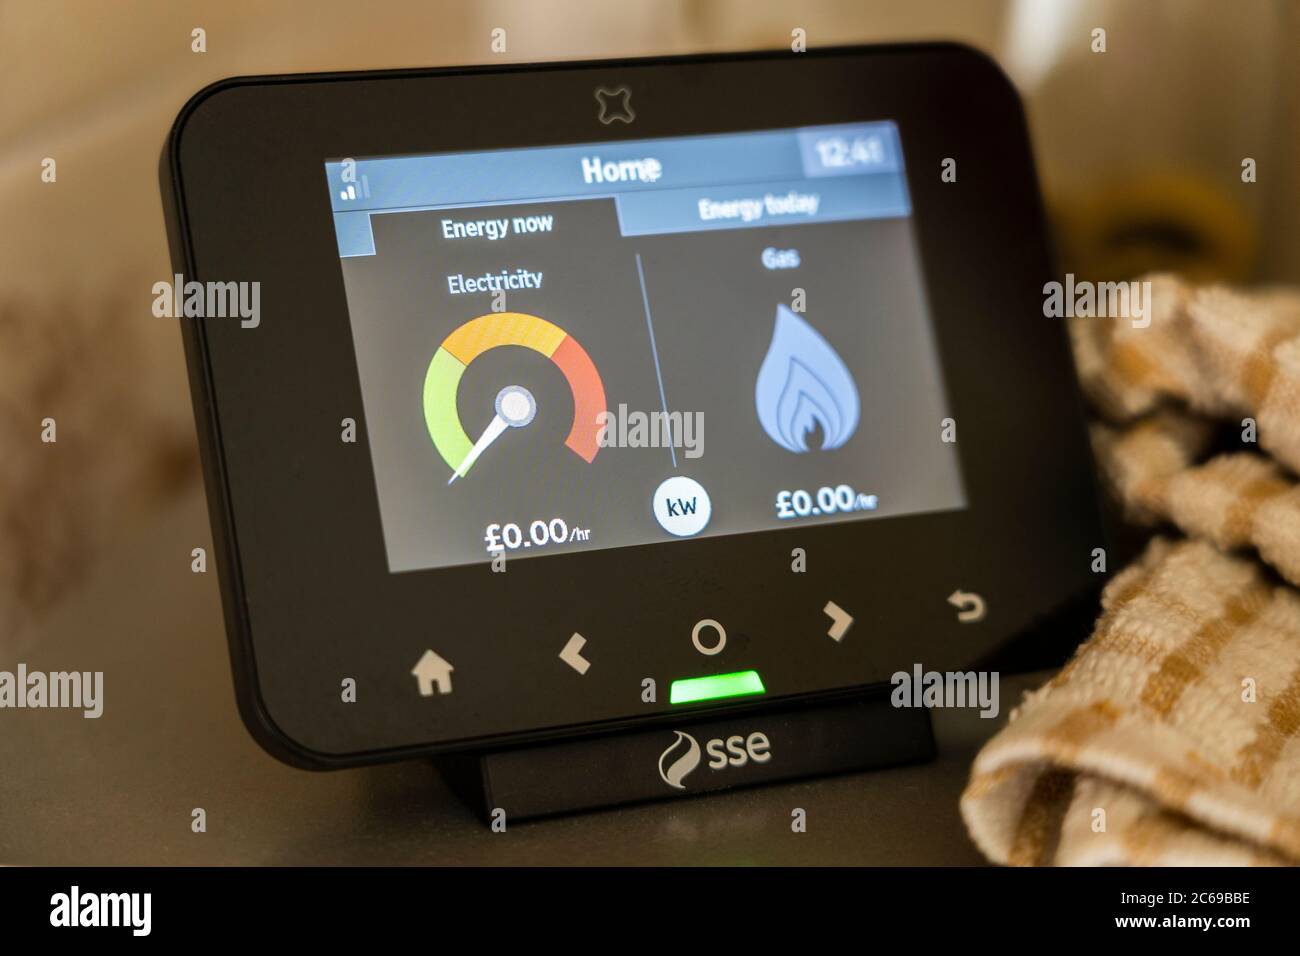 A smart energy meter provided by SSE plc in the kitchen of a UK household, measuring electricity and gas usage Stock Photo